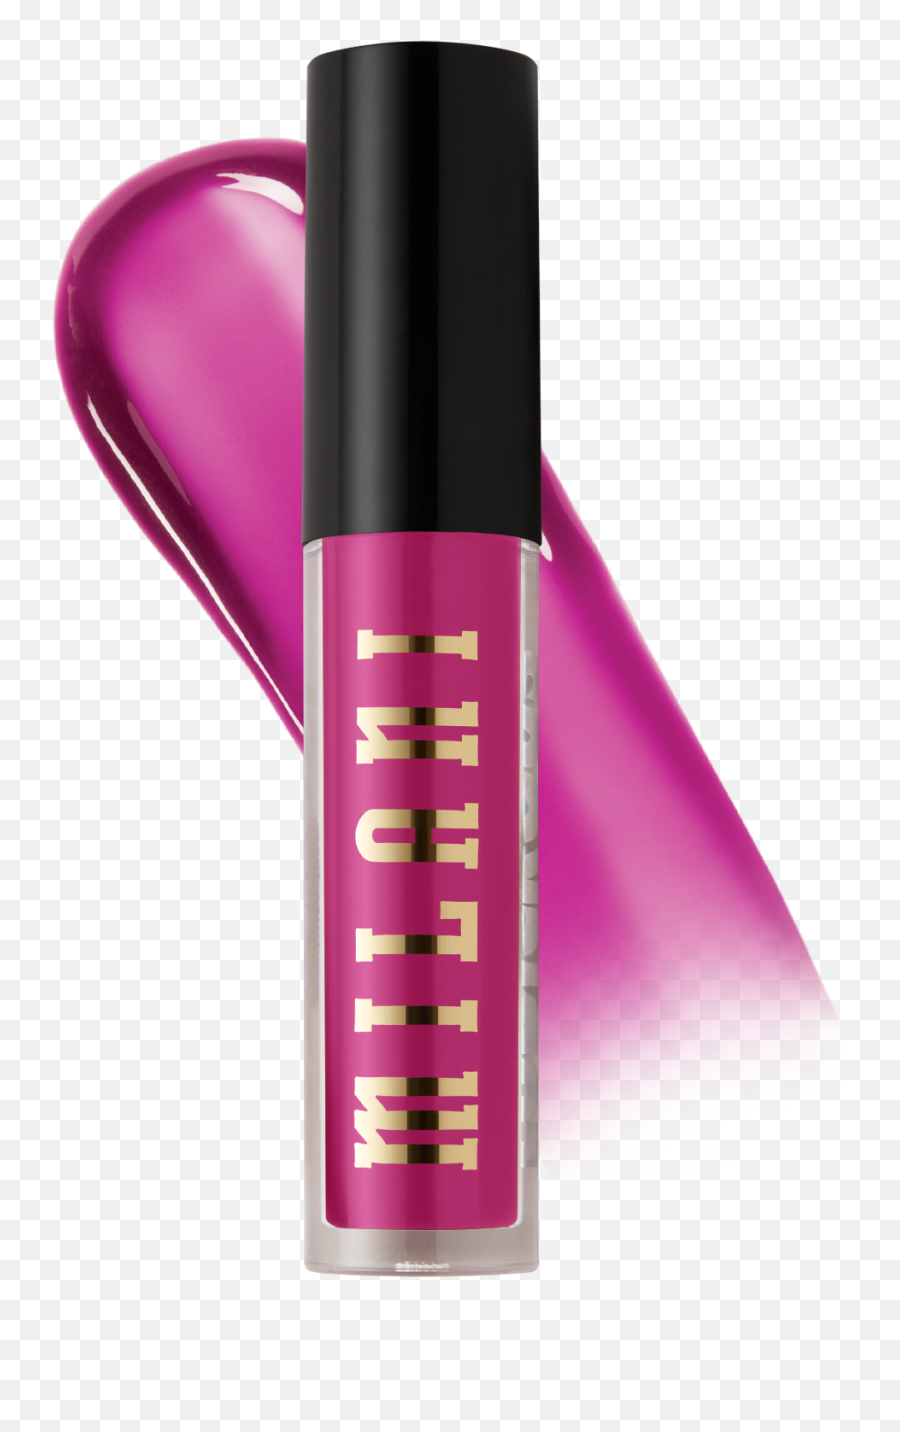 The Best New Makeup Launching In October 2019 Allure - Milani Ludicrous Lip Gloss Png,Wet N Wild Color Icon Blush Swatches